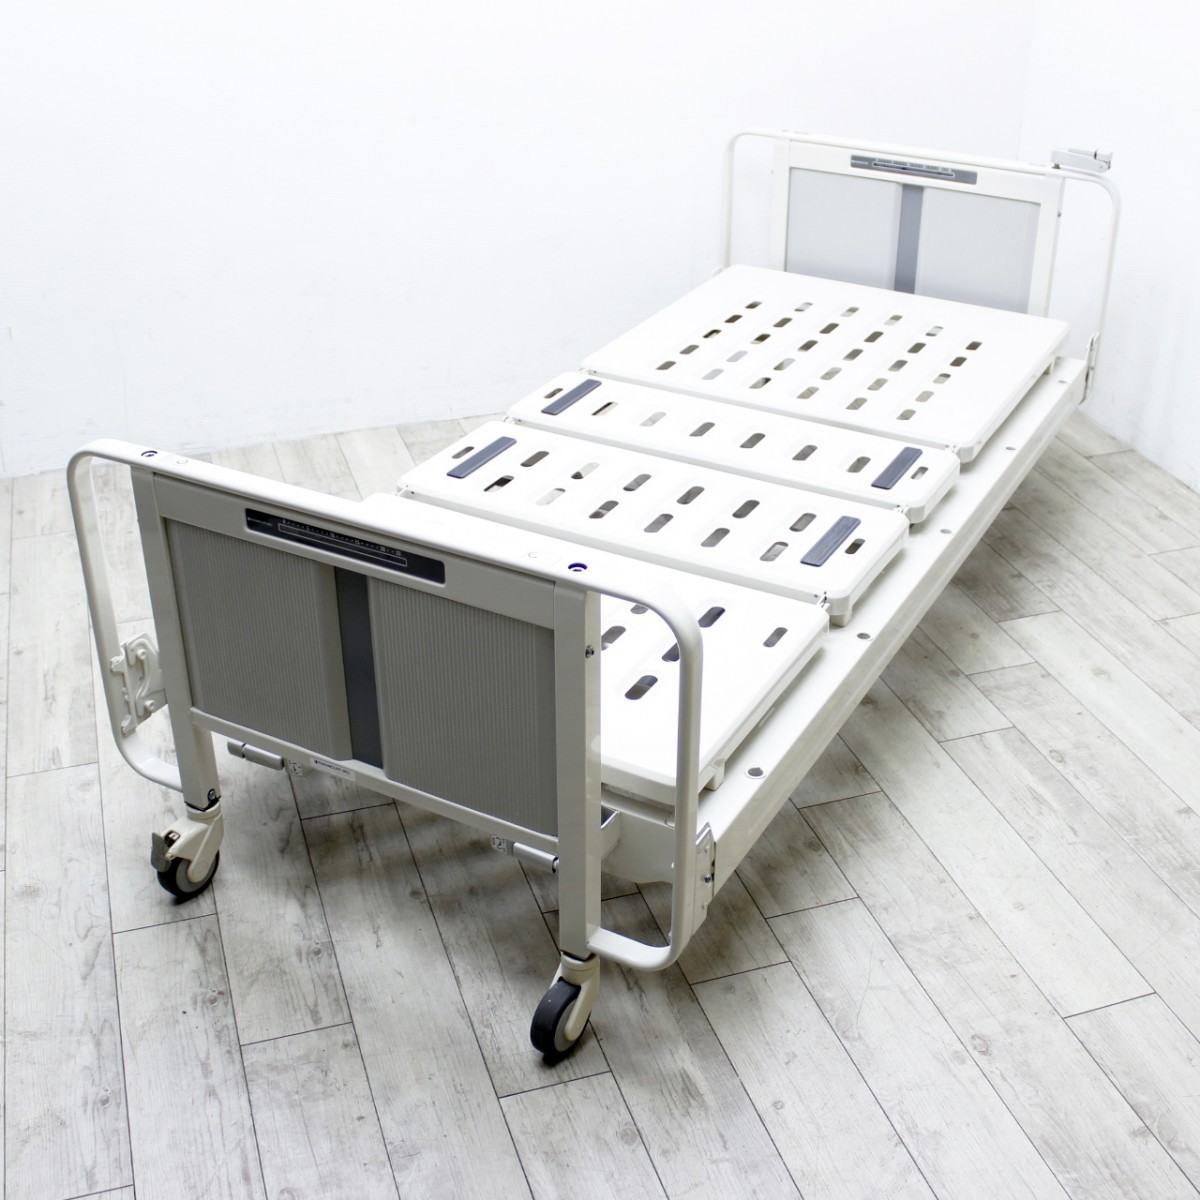  manual bed pala mount bed 3 crank with casters . used [ free shipping ][ used ( washing * disinfection ending ) ]